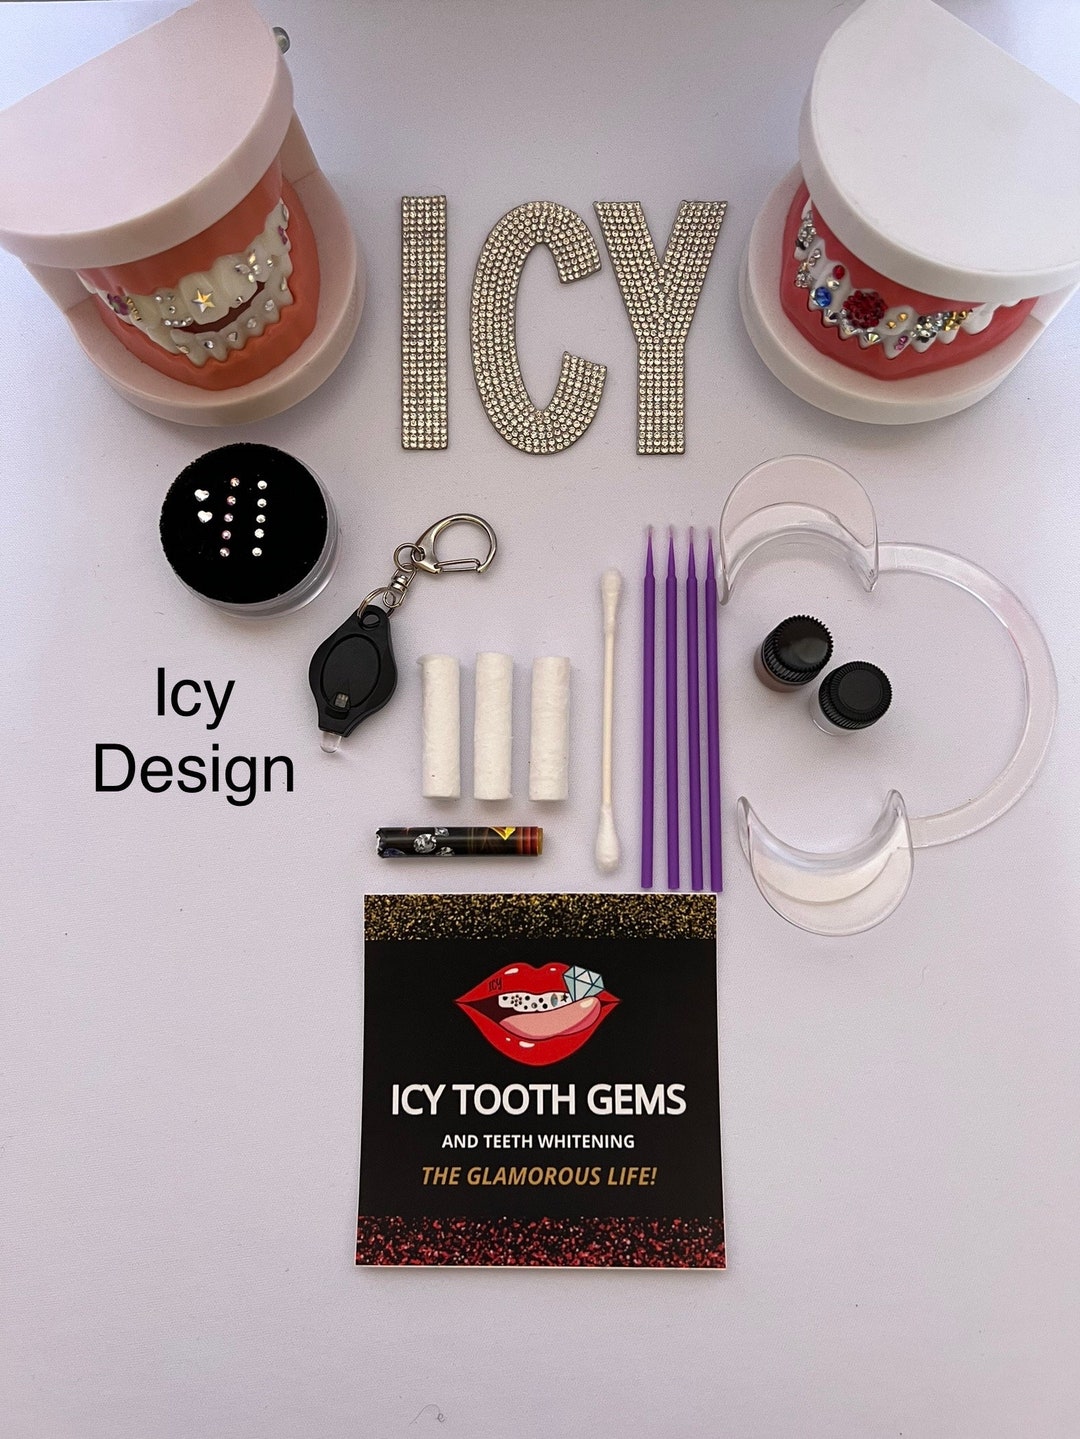 DIY Tooth Gem Kit icy, Dental Adhesive, Instructions, 10 Pcs, UV LED Lite,  Microfiber Brush, Cotton Roll, Wax Gem Picker, Gift for a Bride 